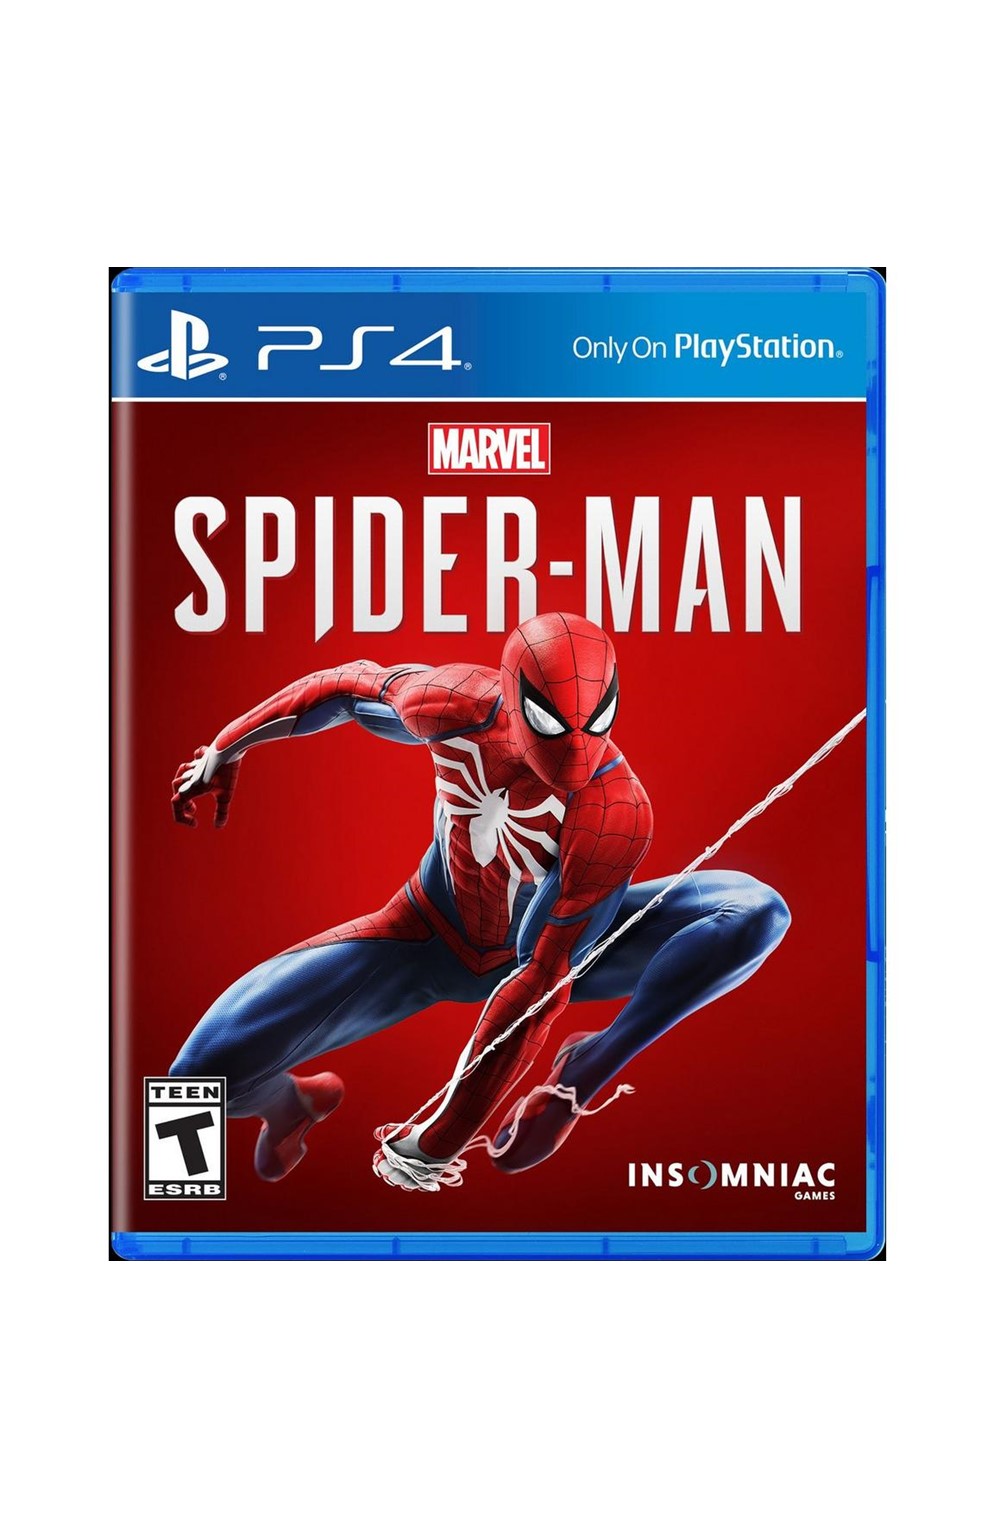 Spider-Man Web of Shadows Playstation 3 PS3 Game For Sale